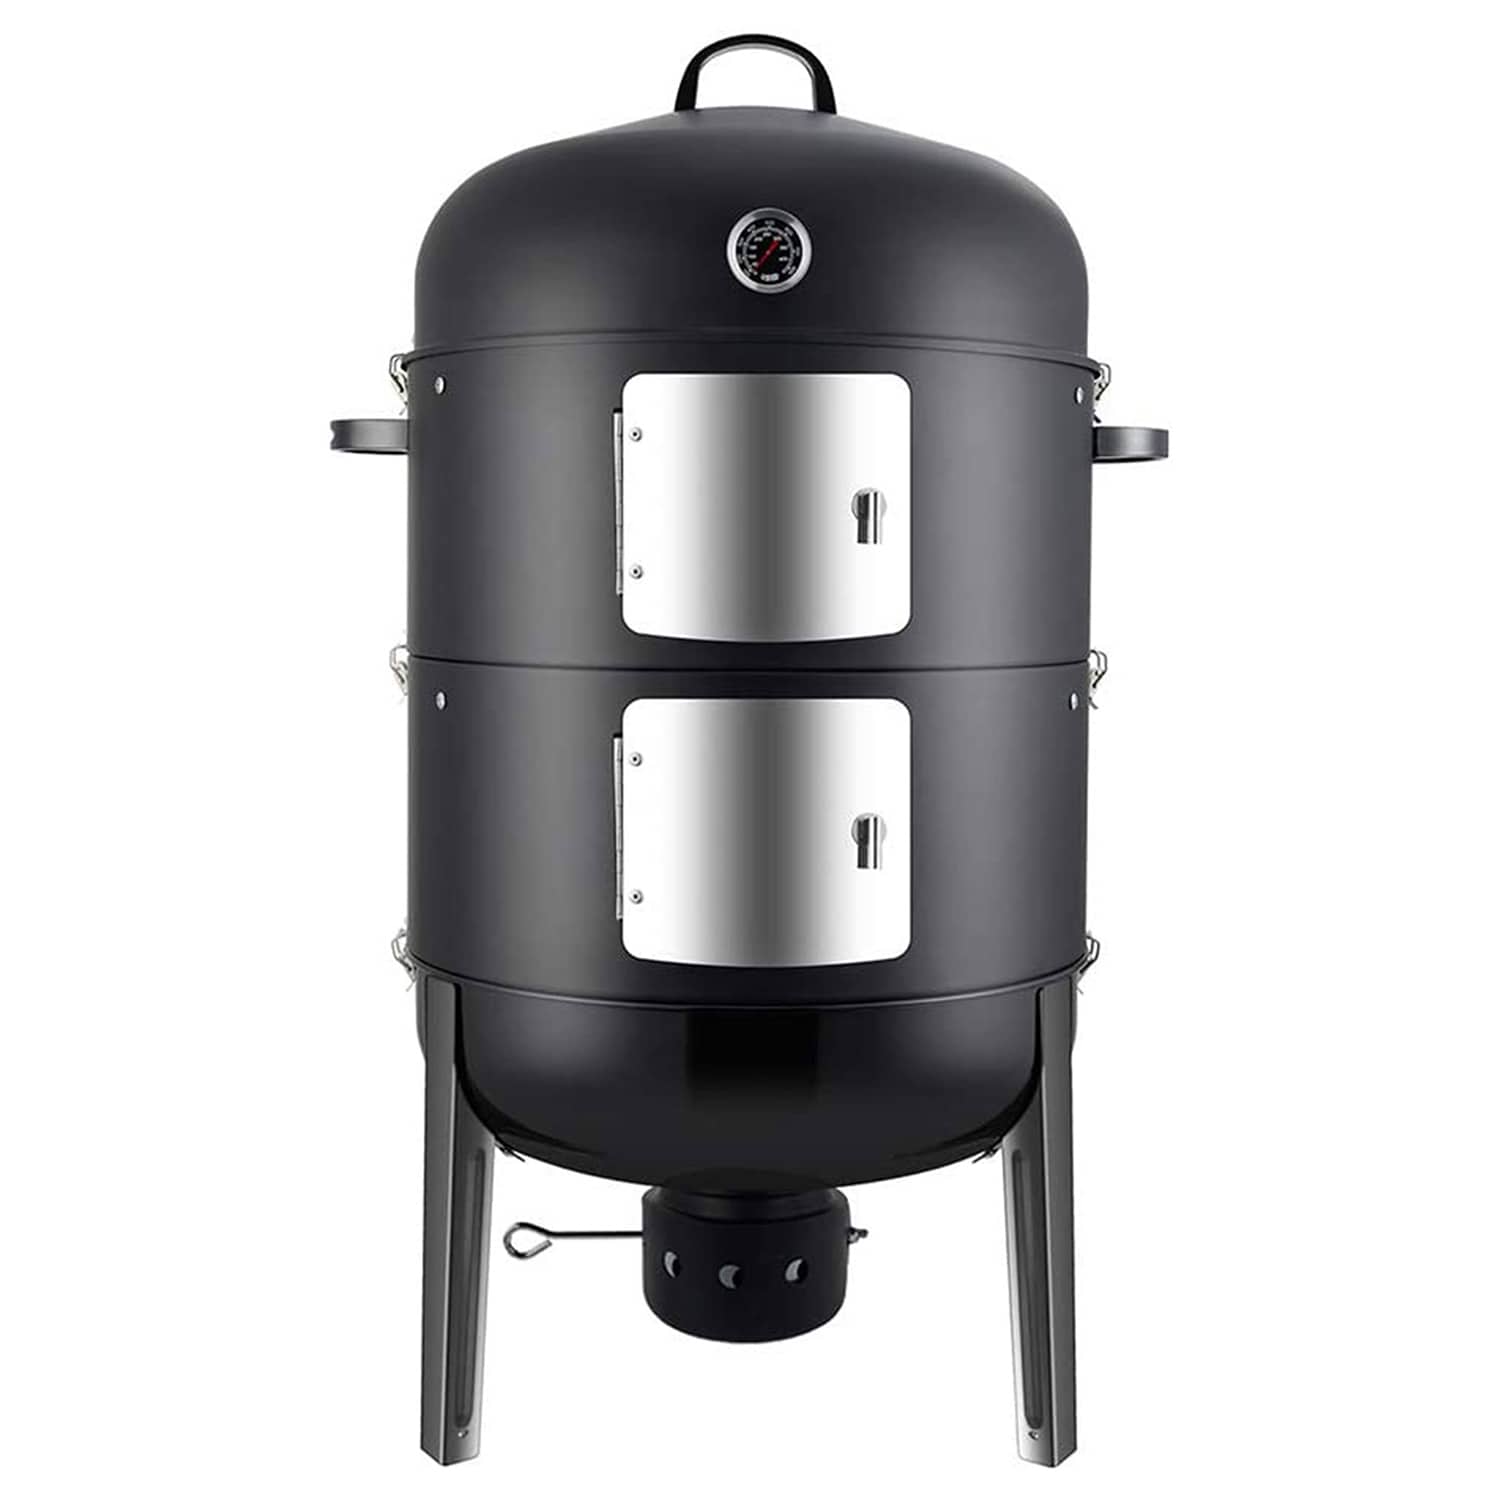 Realcook 636-Sq in Black Vertical Charcoal Smoker in the Charcoal